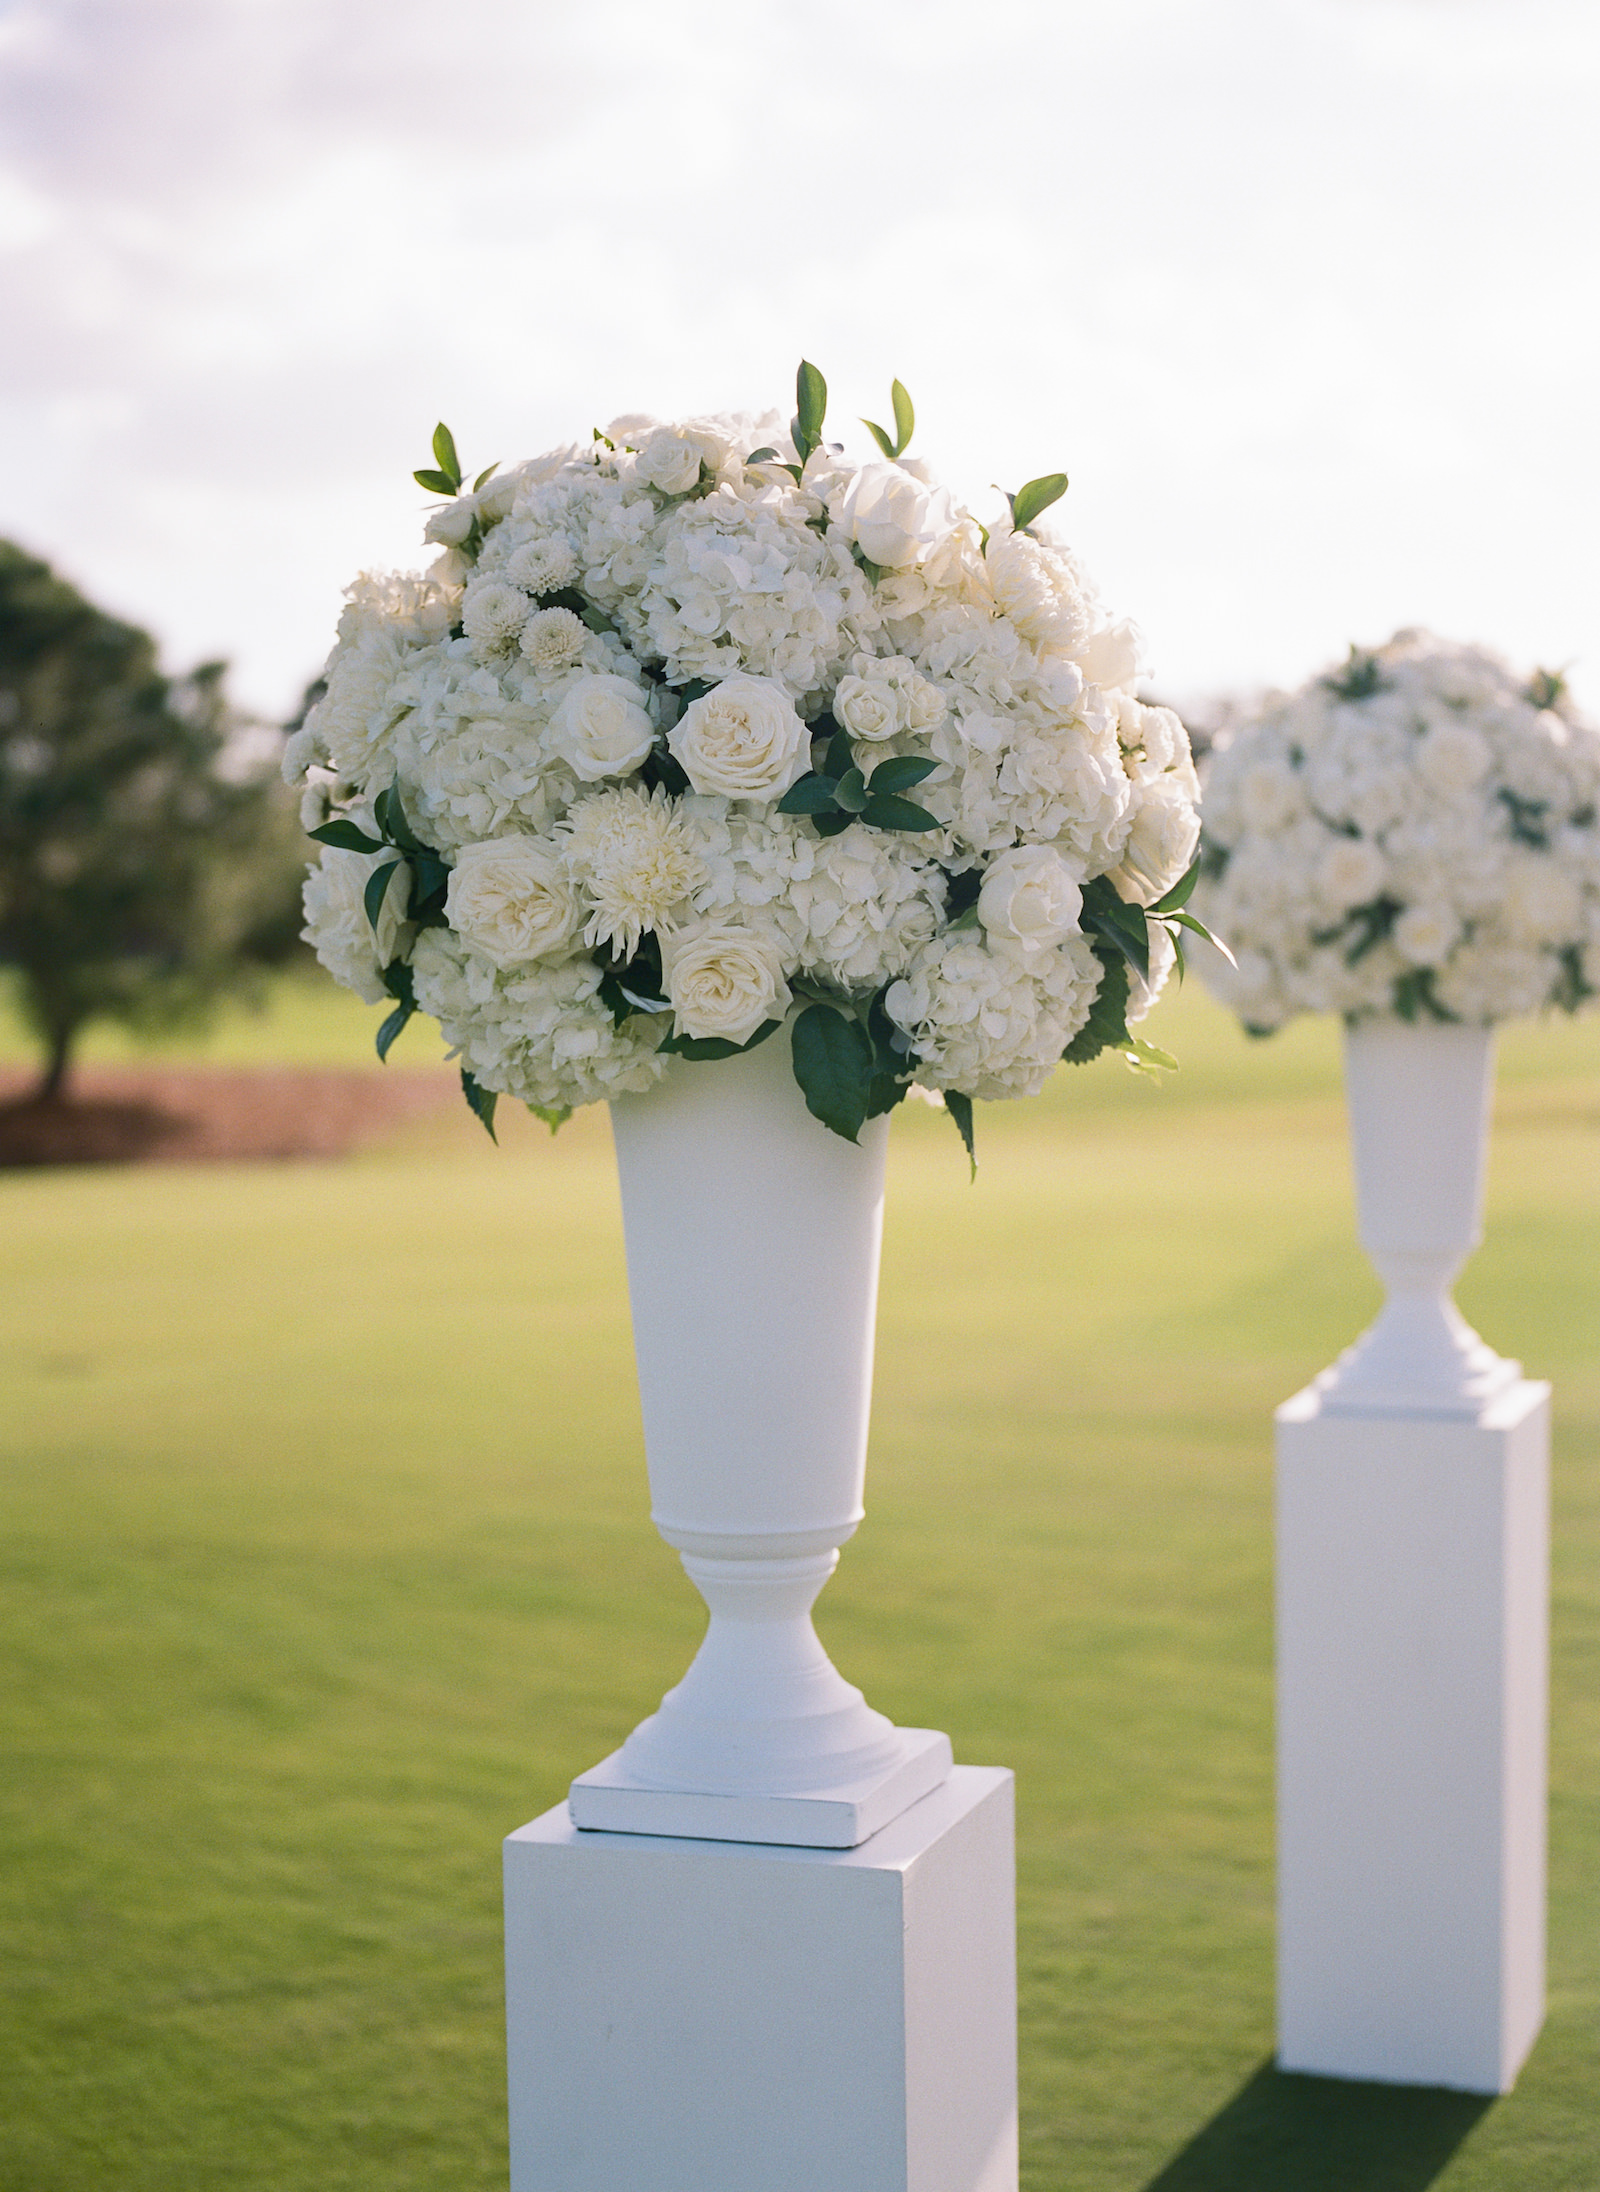 Luxurious Formal Outdoor All White Wedding Ceremony Decor on Golf Course, White Vase with White Roses, Hydrangeas Floral Arrangement | Tampa Bay Wedding Venue Pelican Golf Club | Wedding Florist Bruce Wayne Florals | Wedding Planner Parties A'la Carte | Wedding Rentals Gabro Event Services